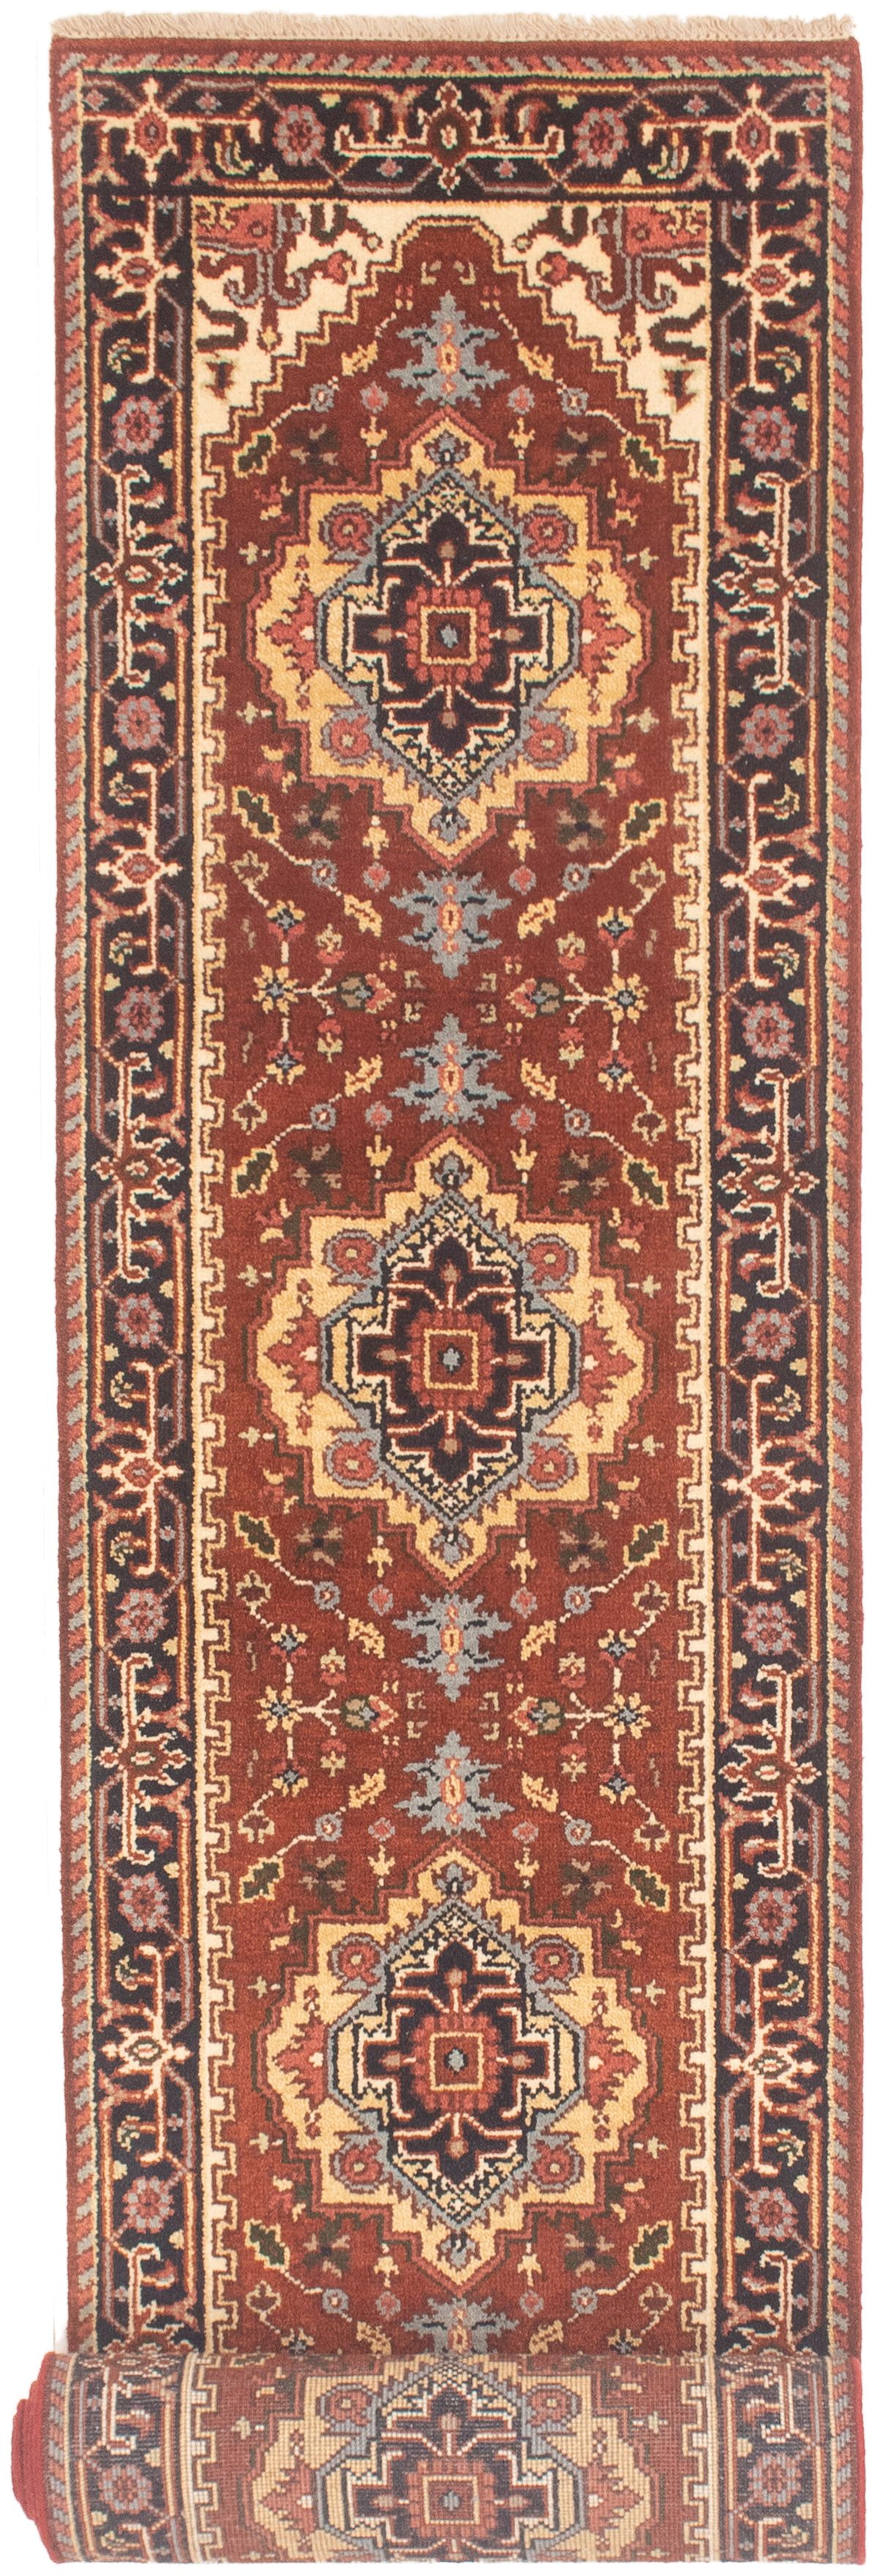 Hand-knotted Serapi Heritage Dark Copper Wool Rug 2'7" x 15'11"  Size: 2'7" x 15'11"  